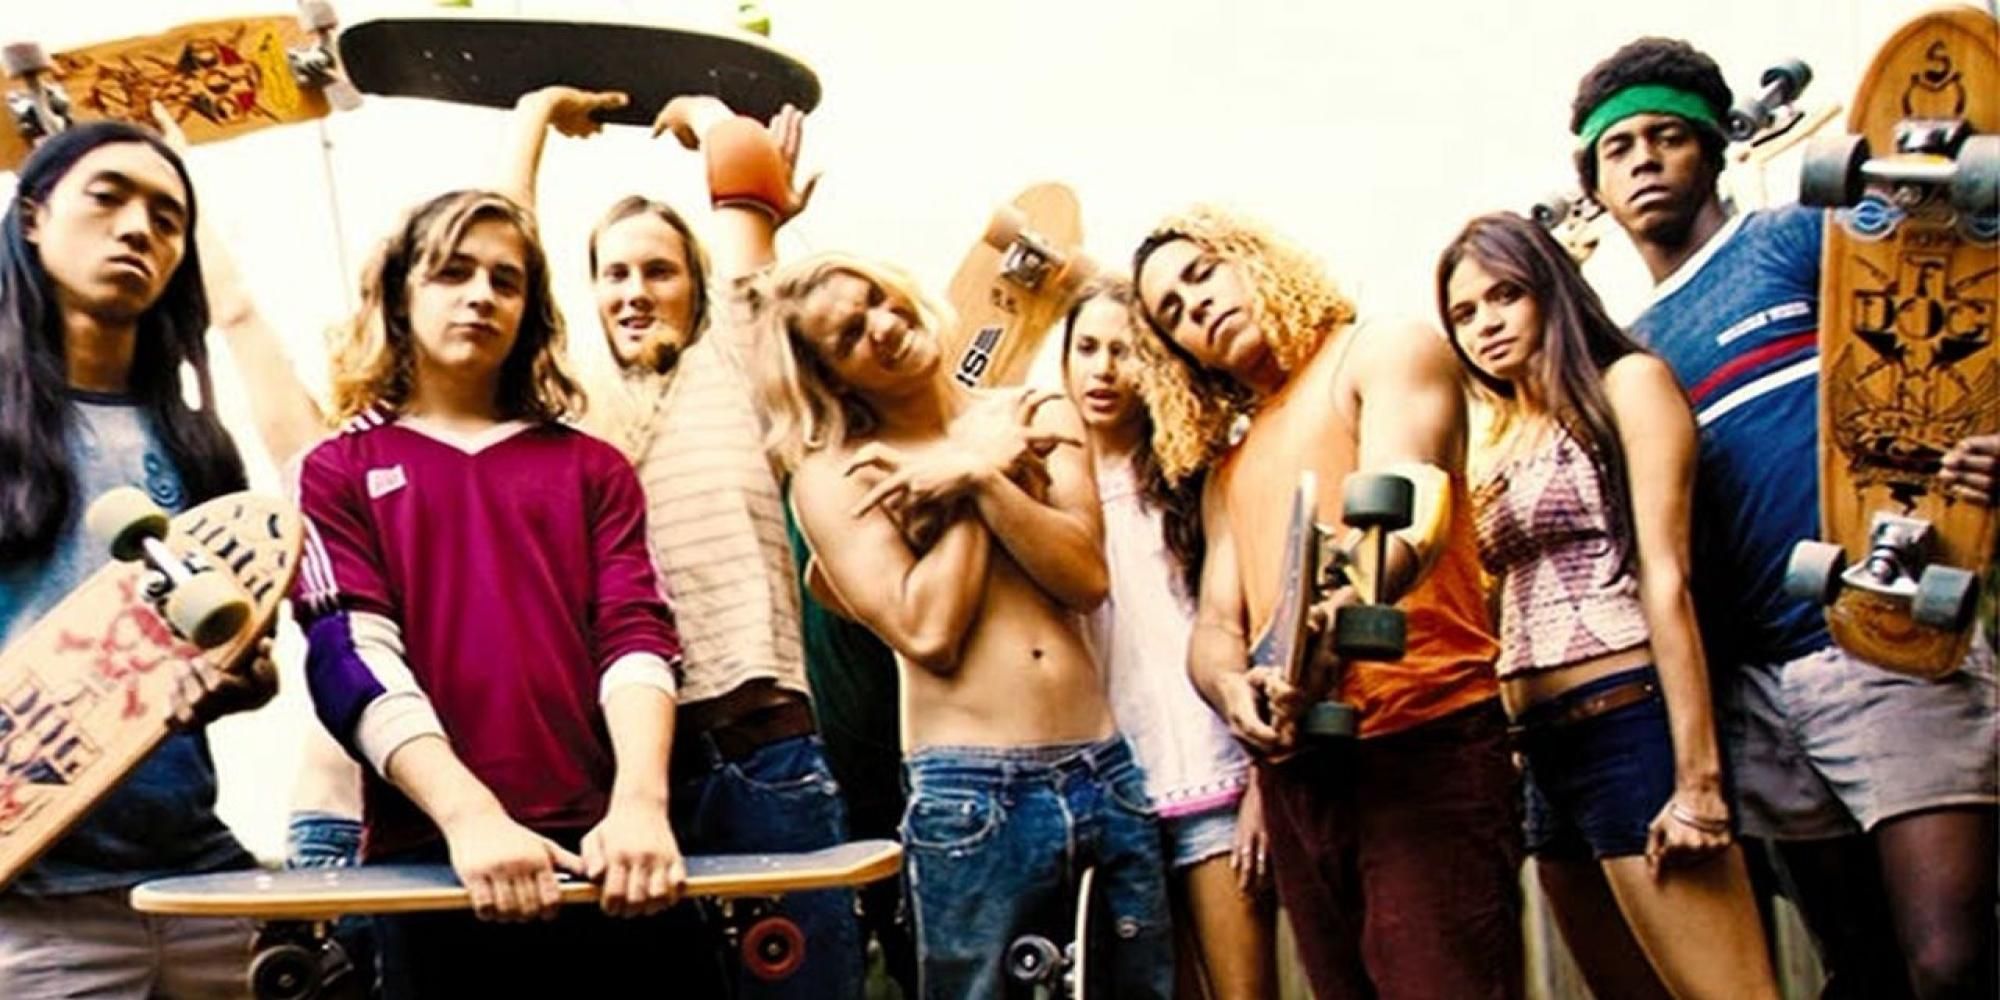 A group of teens stand together from Lords of Dogtown